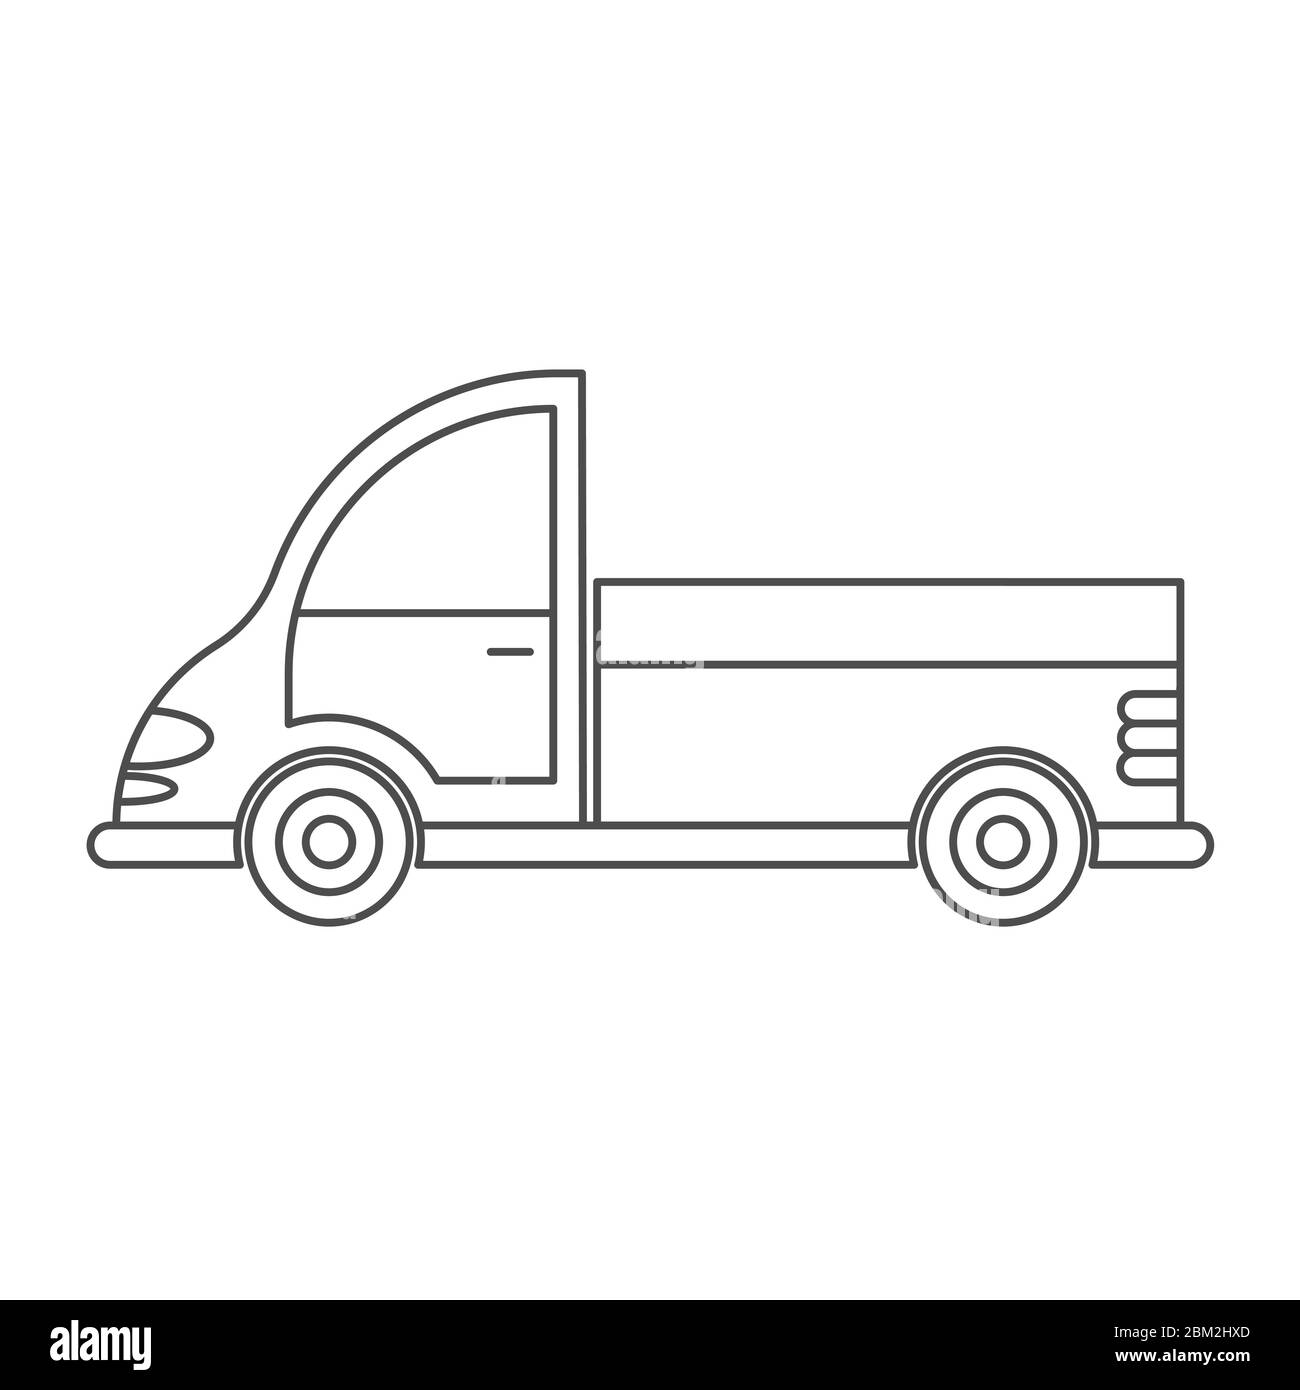 Vector icon of a car or commercial van. Simple design, an empty outline isolated on a white background. Design for coloring books, websites, and apps Stock Vector